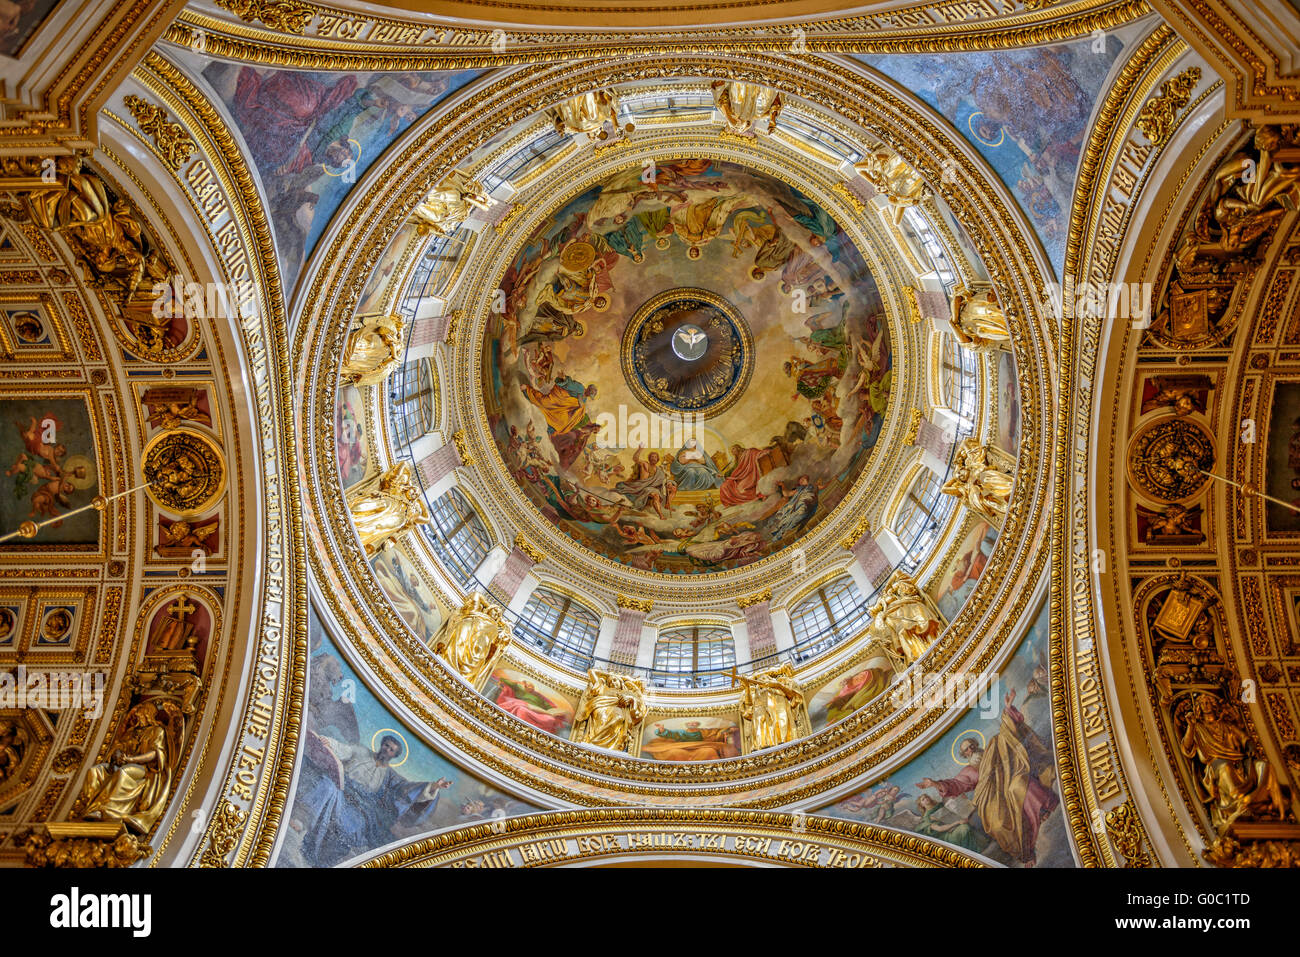 Interior decoration of Saint Isaac's Cathedral in Stock Photo